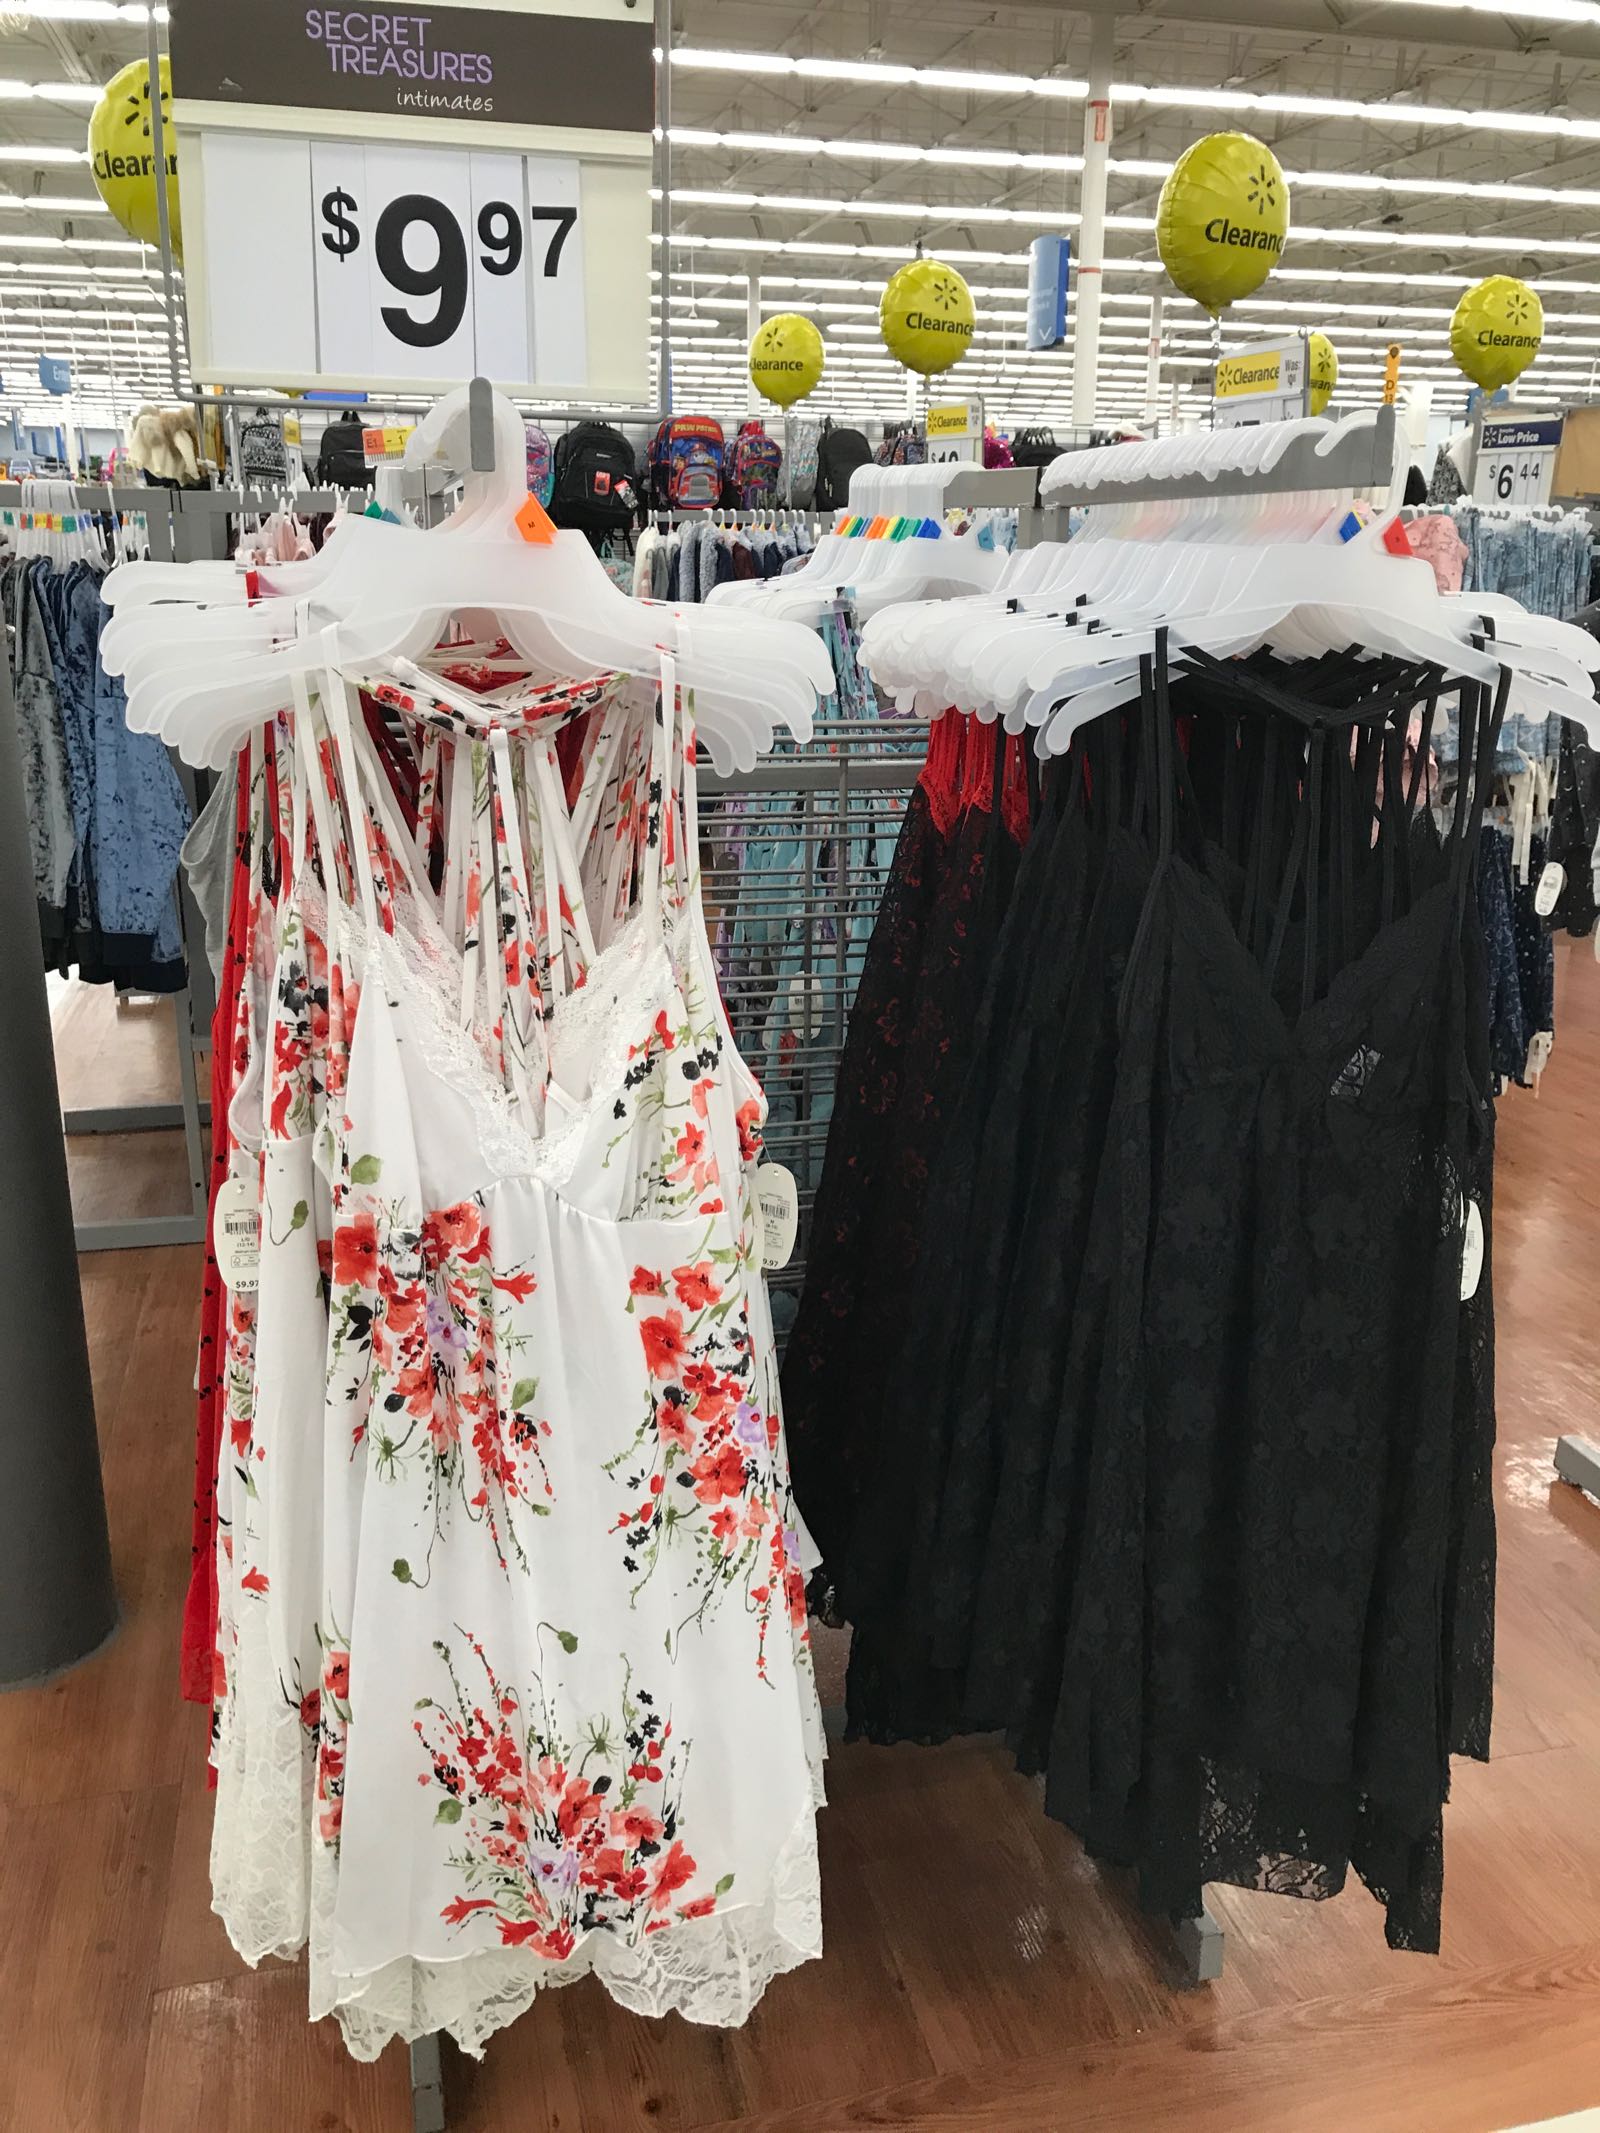 Walmart Has the Cutest Valentine's Day Lingerie Under $15! - The Budget ...